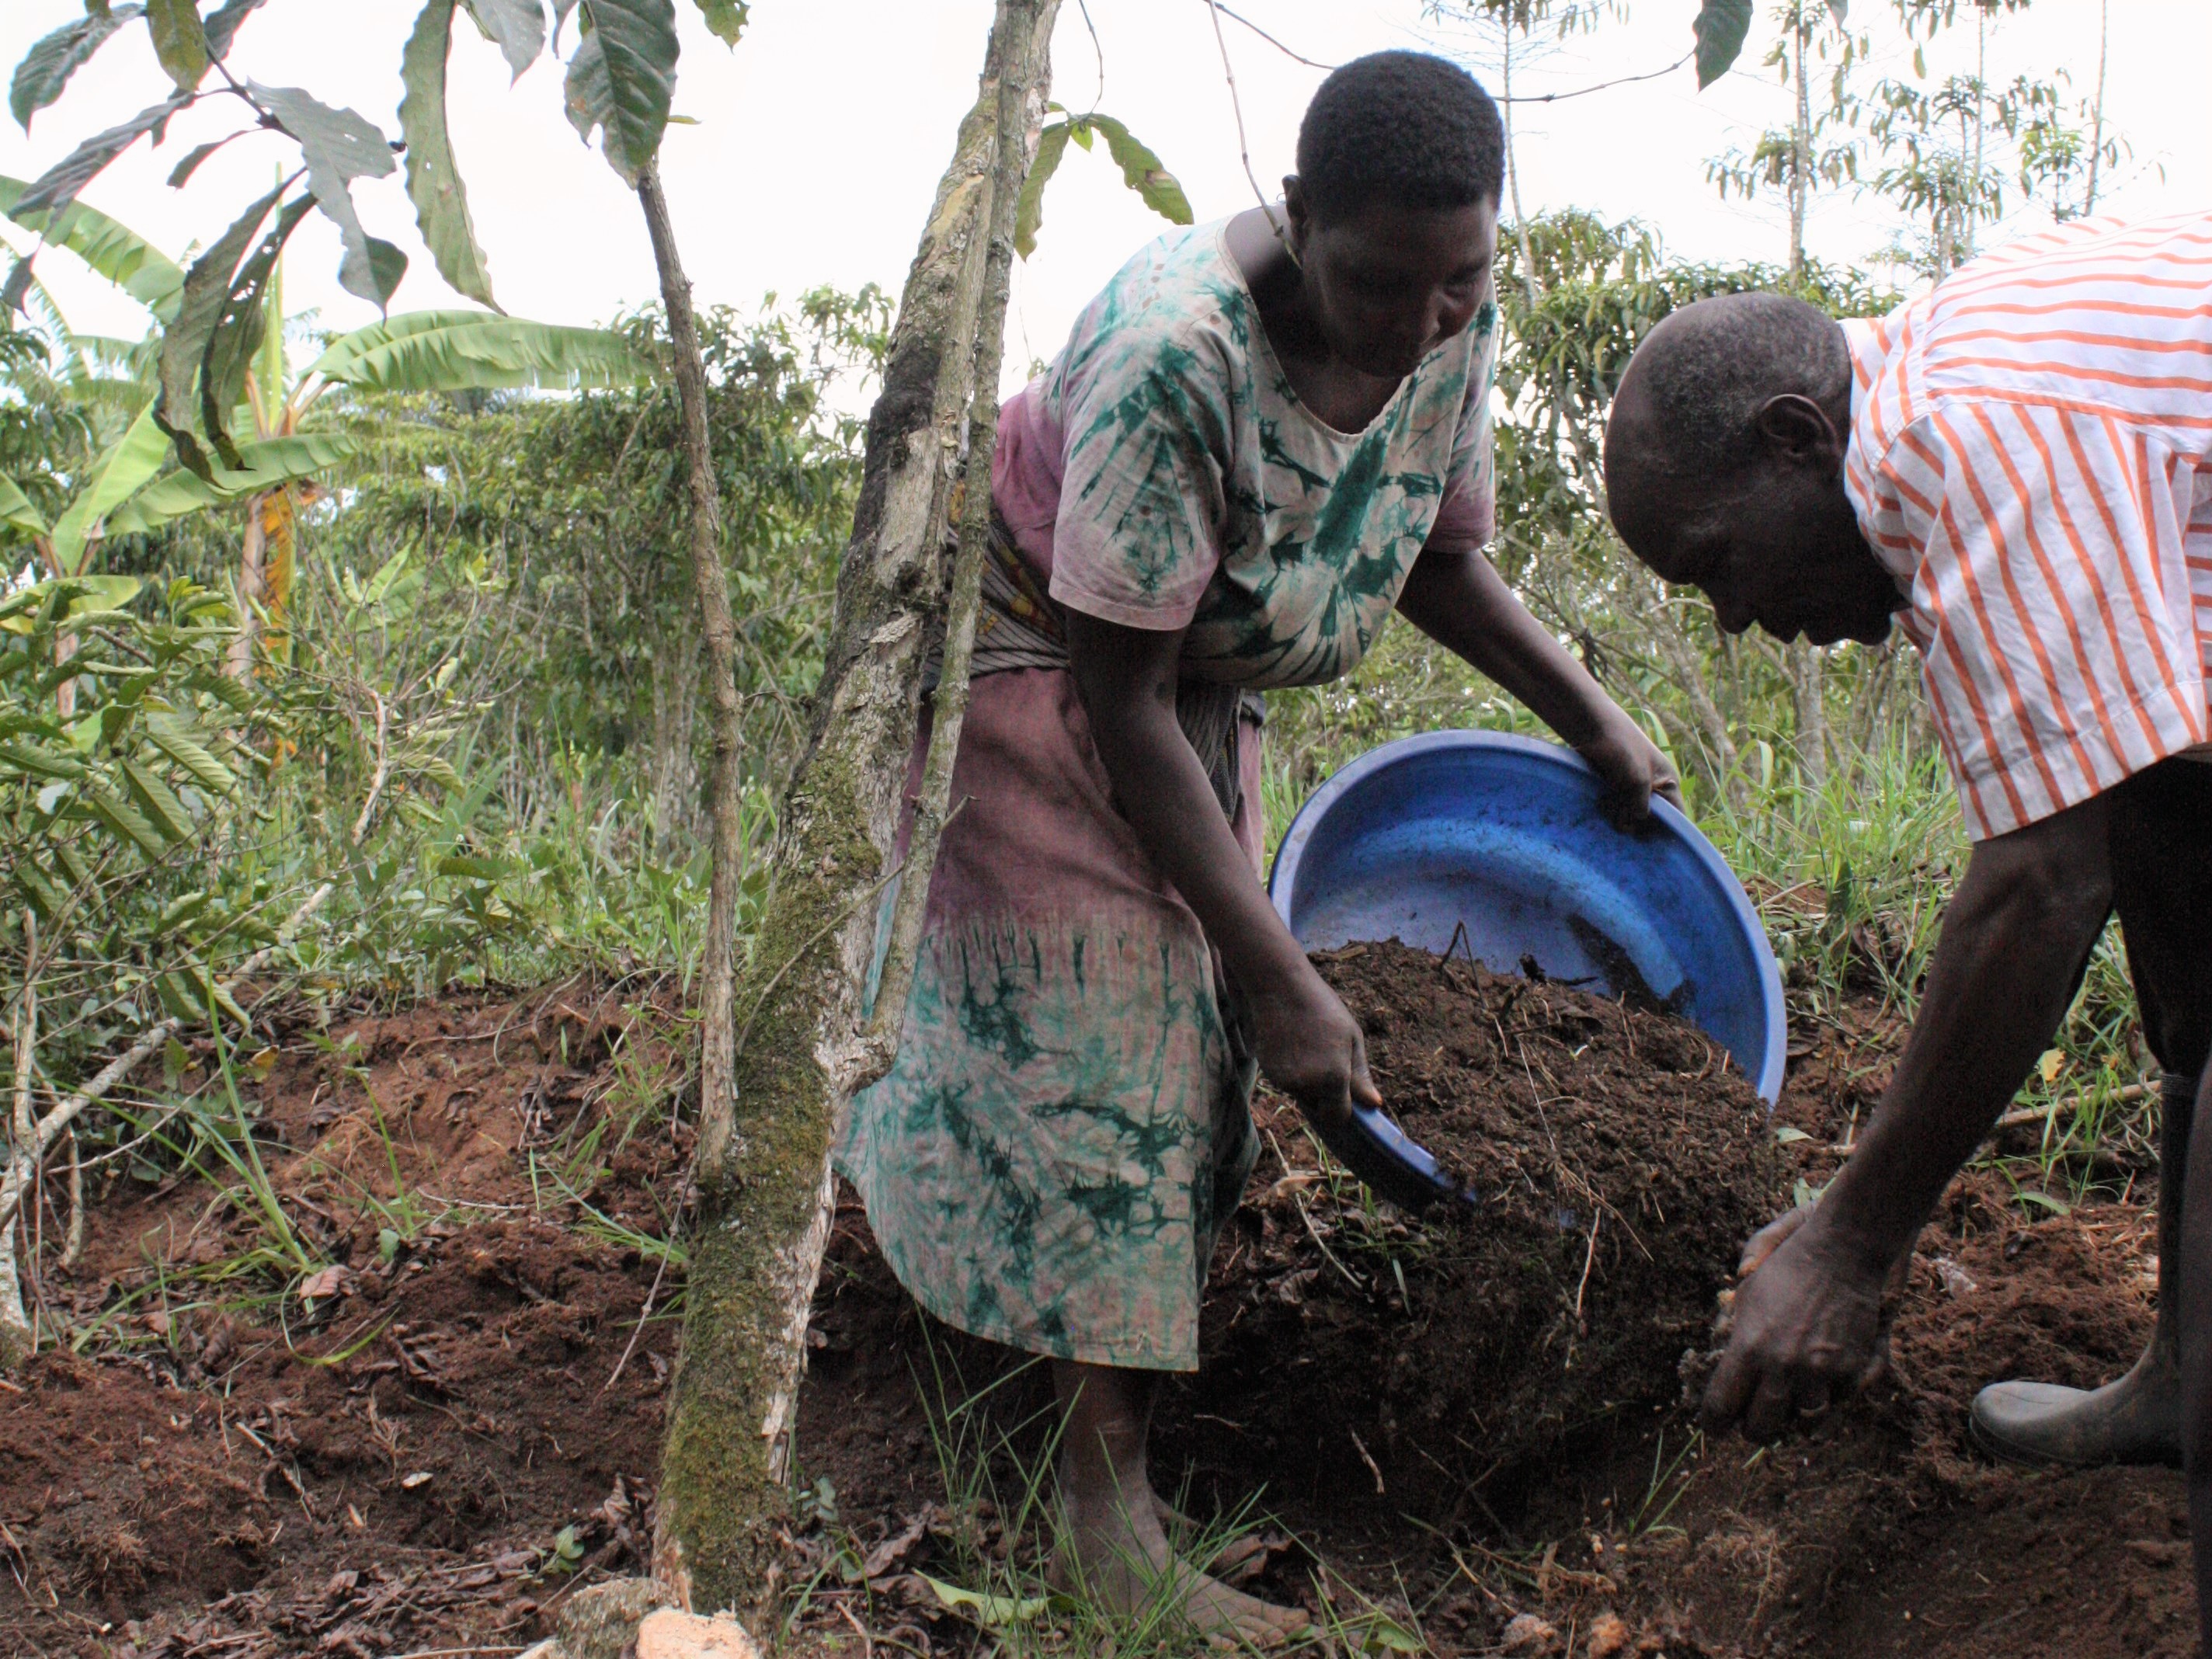 Paul and Jane apply fertilizer to their newly-stumped coffee tree